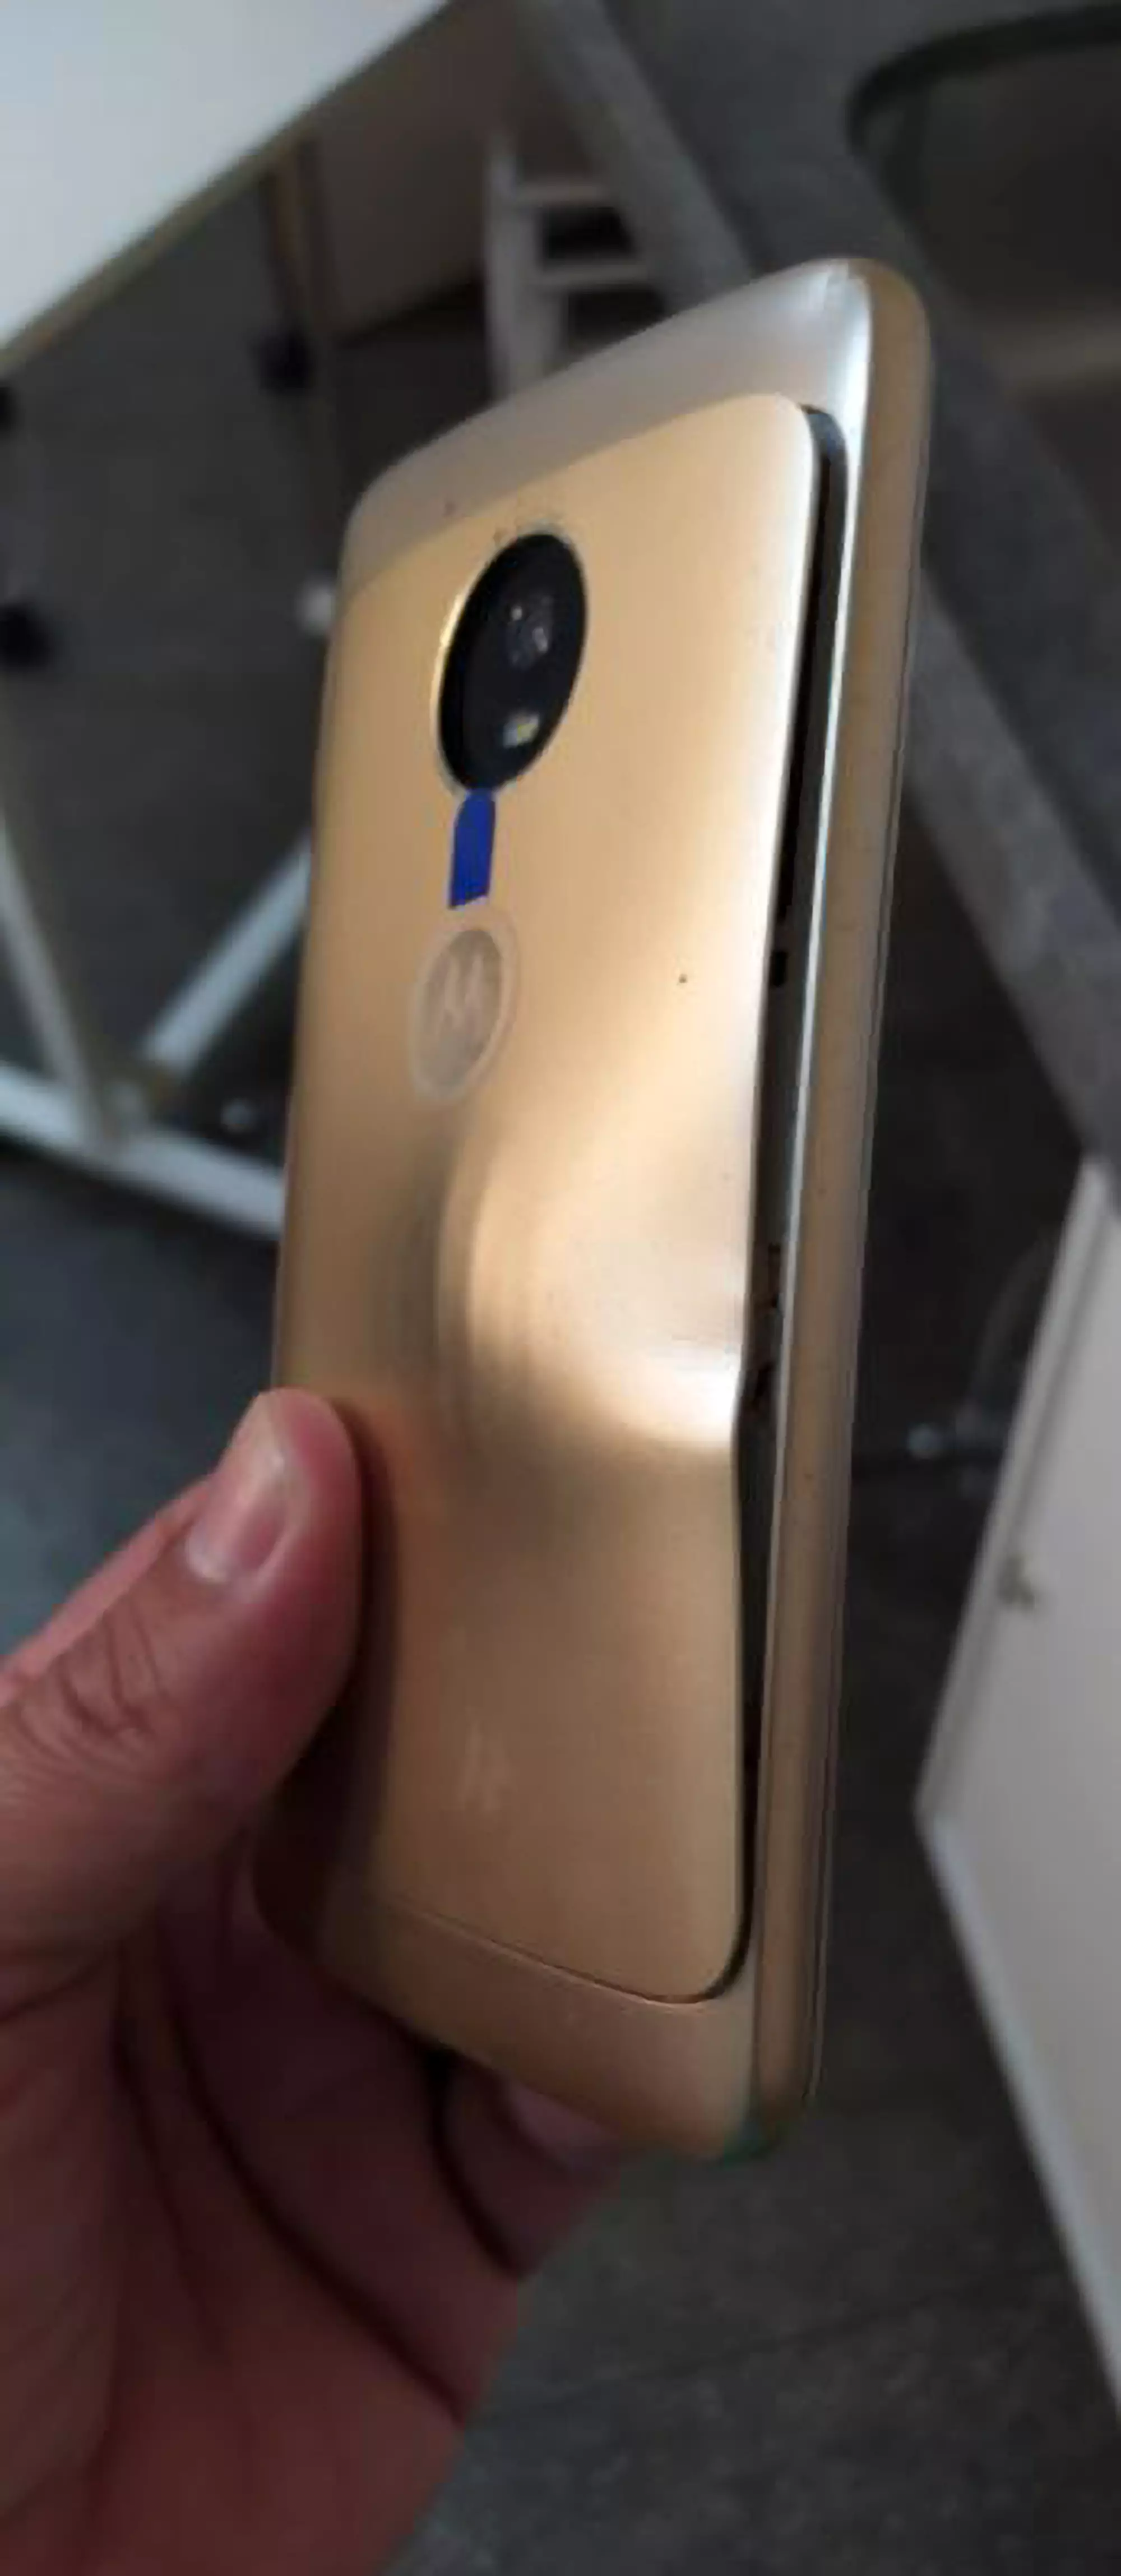 The bullet miraculously left the smartphone with nothing but a smashed screen and a visible dent.